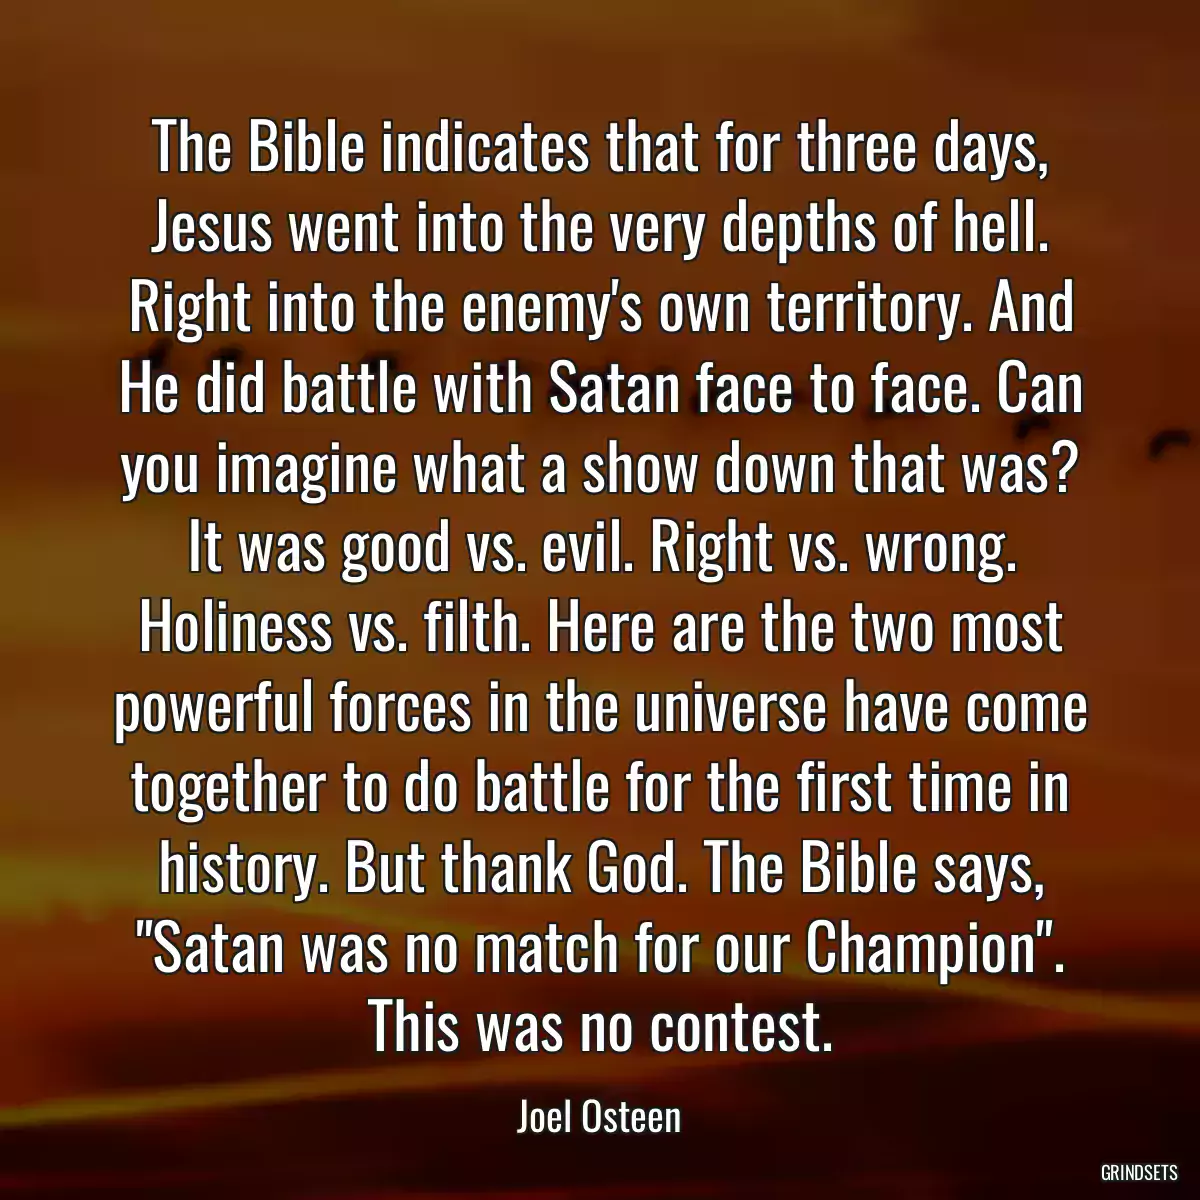 The Bible indicates that for three days, Jesus went into the very depths of hell. Right into the enemy\'s own territory. And He did battle with Satan face to face. Can you imagine what a show down that was? It was good vs. evil. Right vs. wrong. Holiness vs. filth. Here are the two most powerful forces in the universe have come together to do battle for the first time in history. But thank God. The Bible says, \